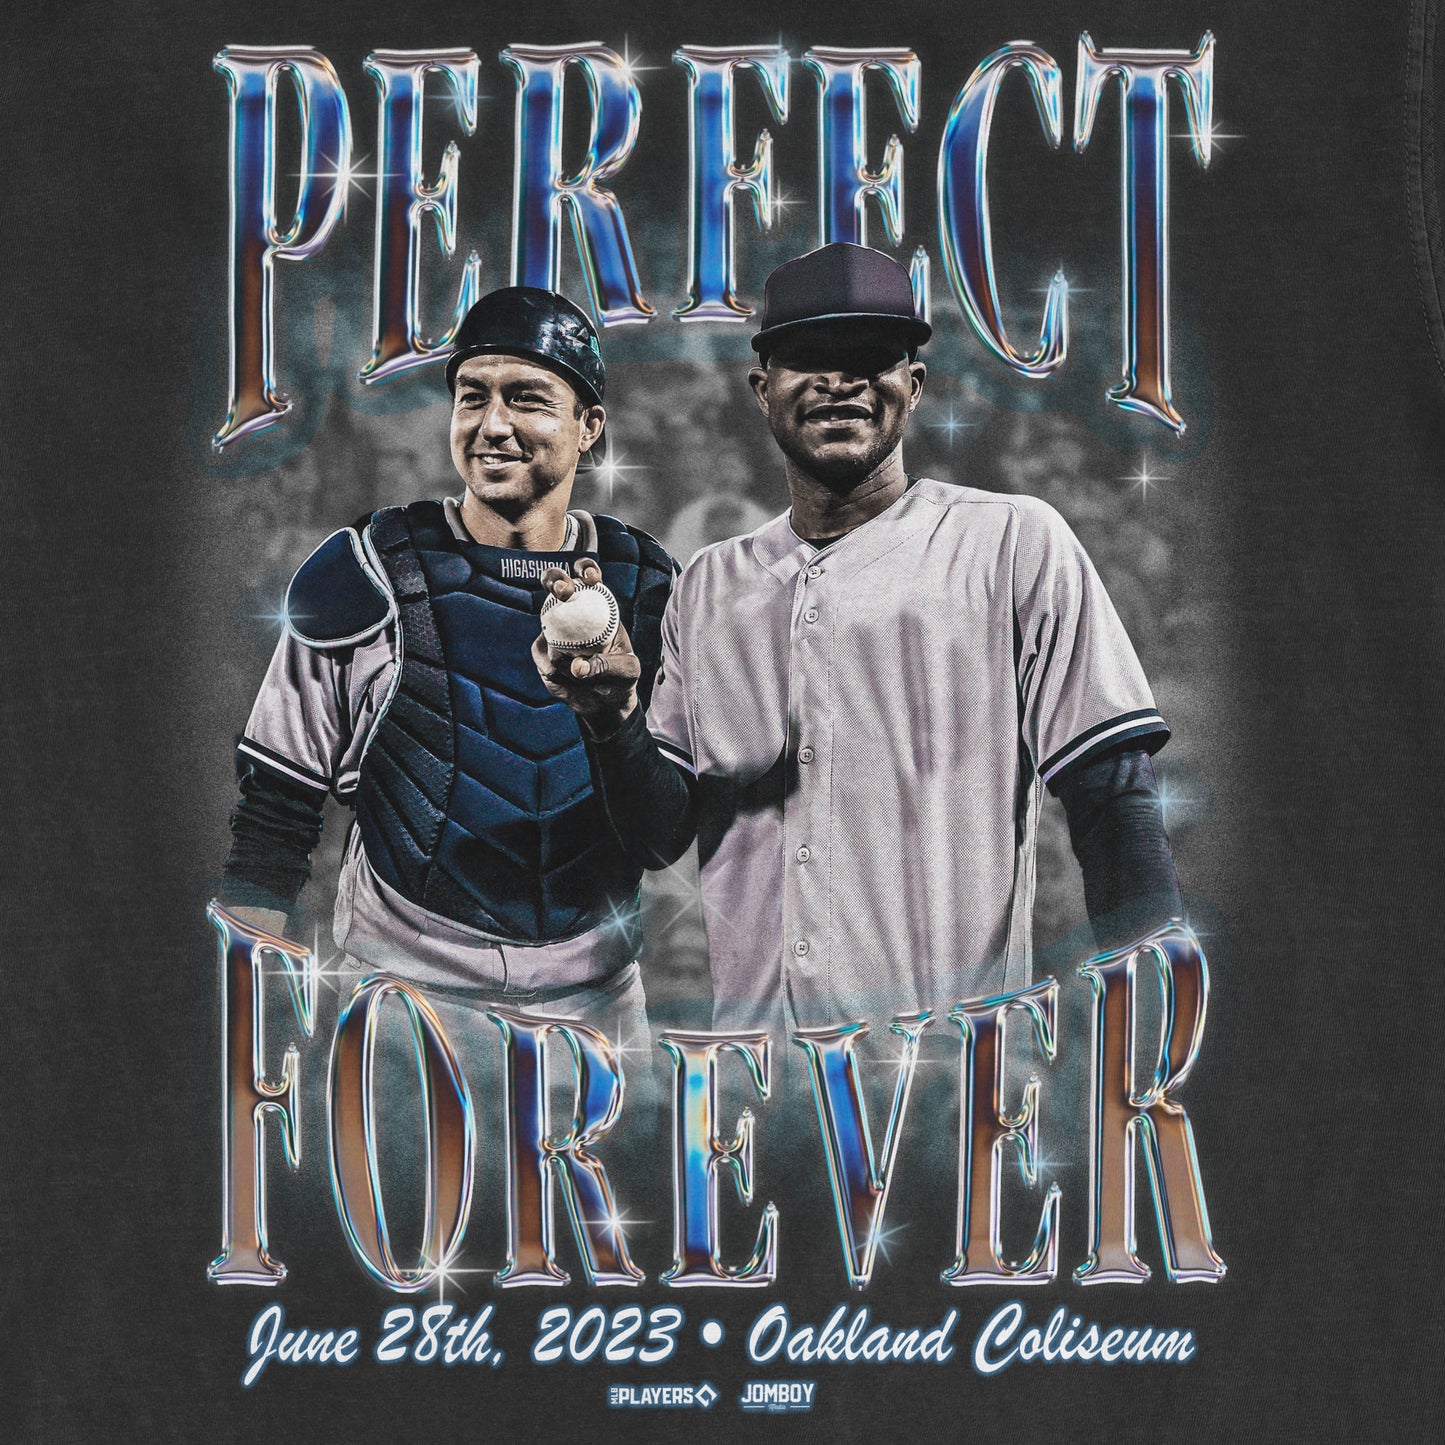 Perfect Forever | Comfort Colors® Vintage Tee